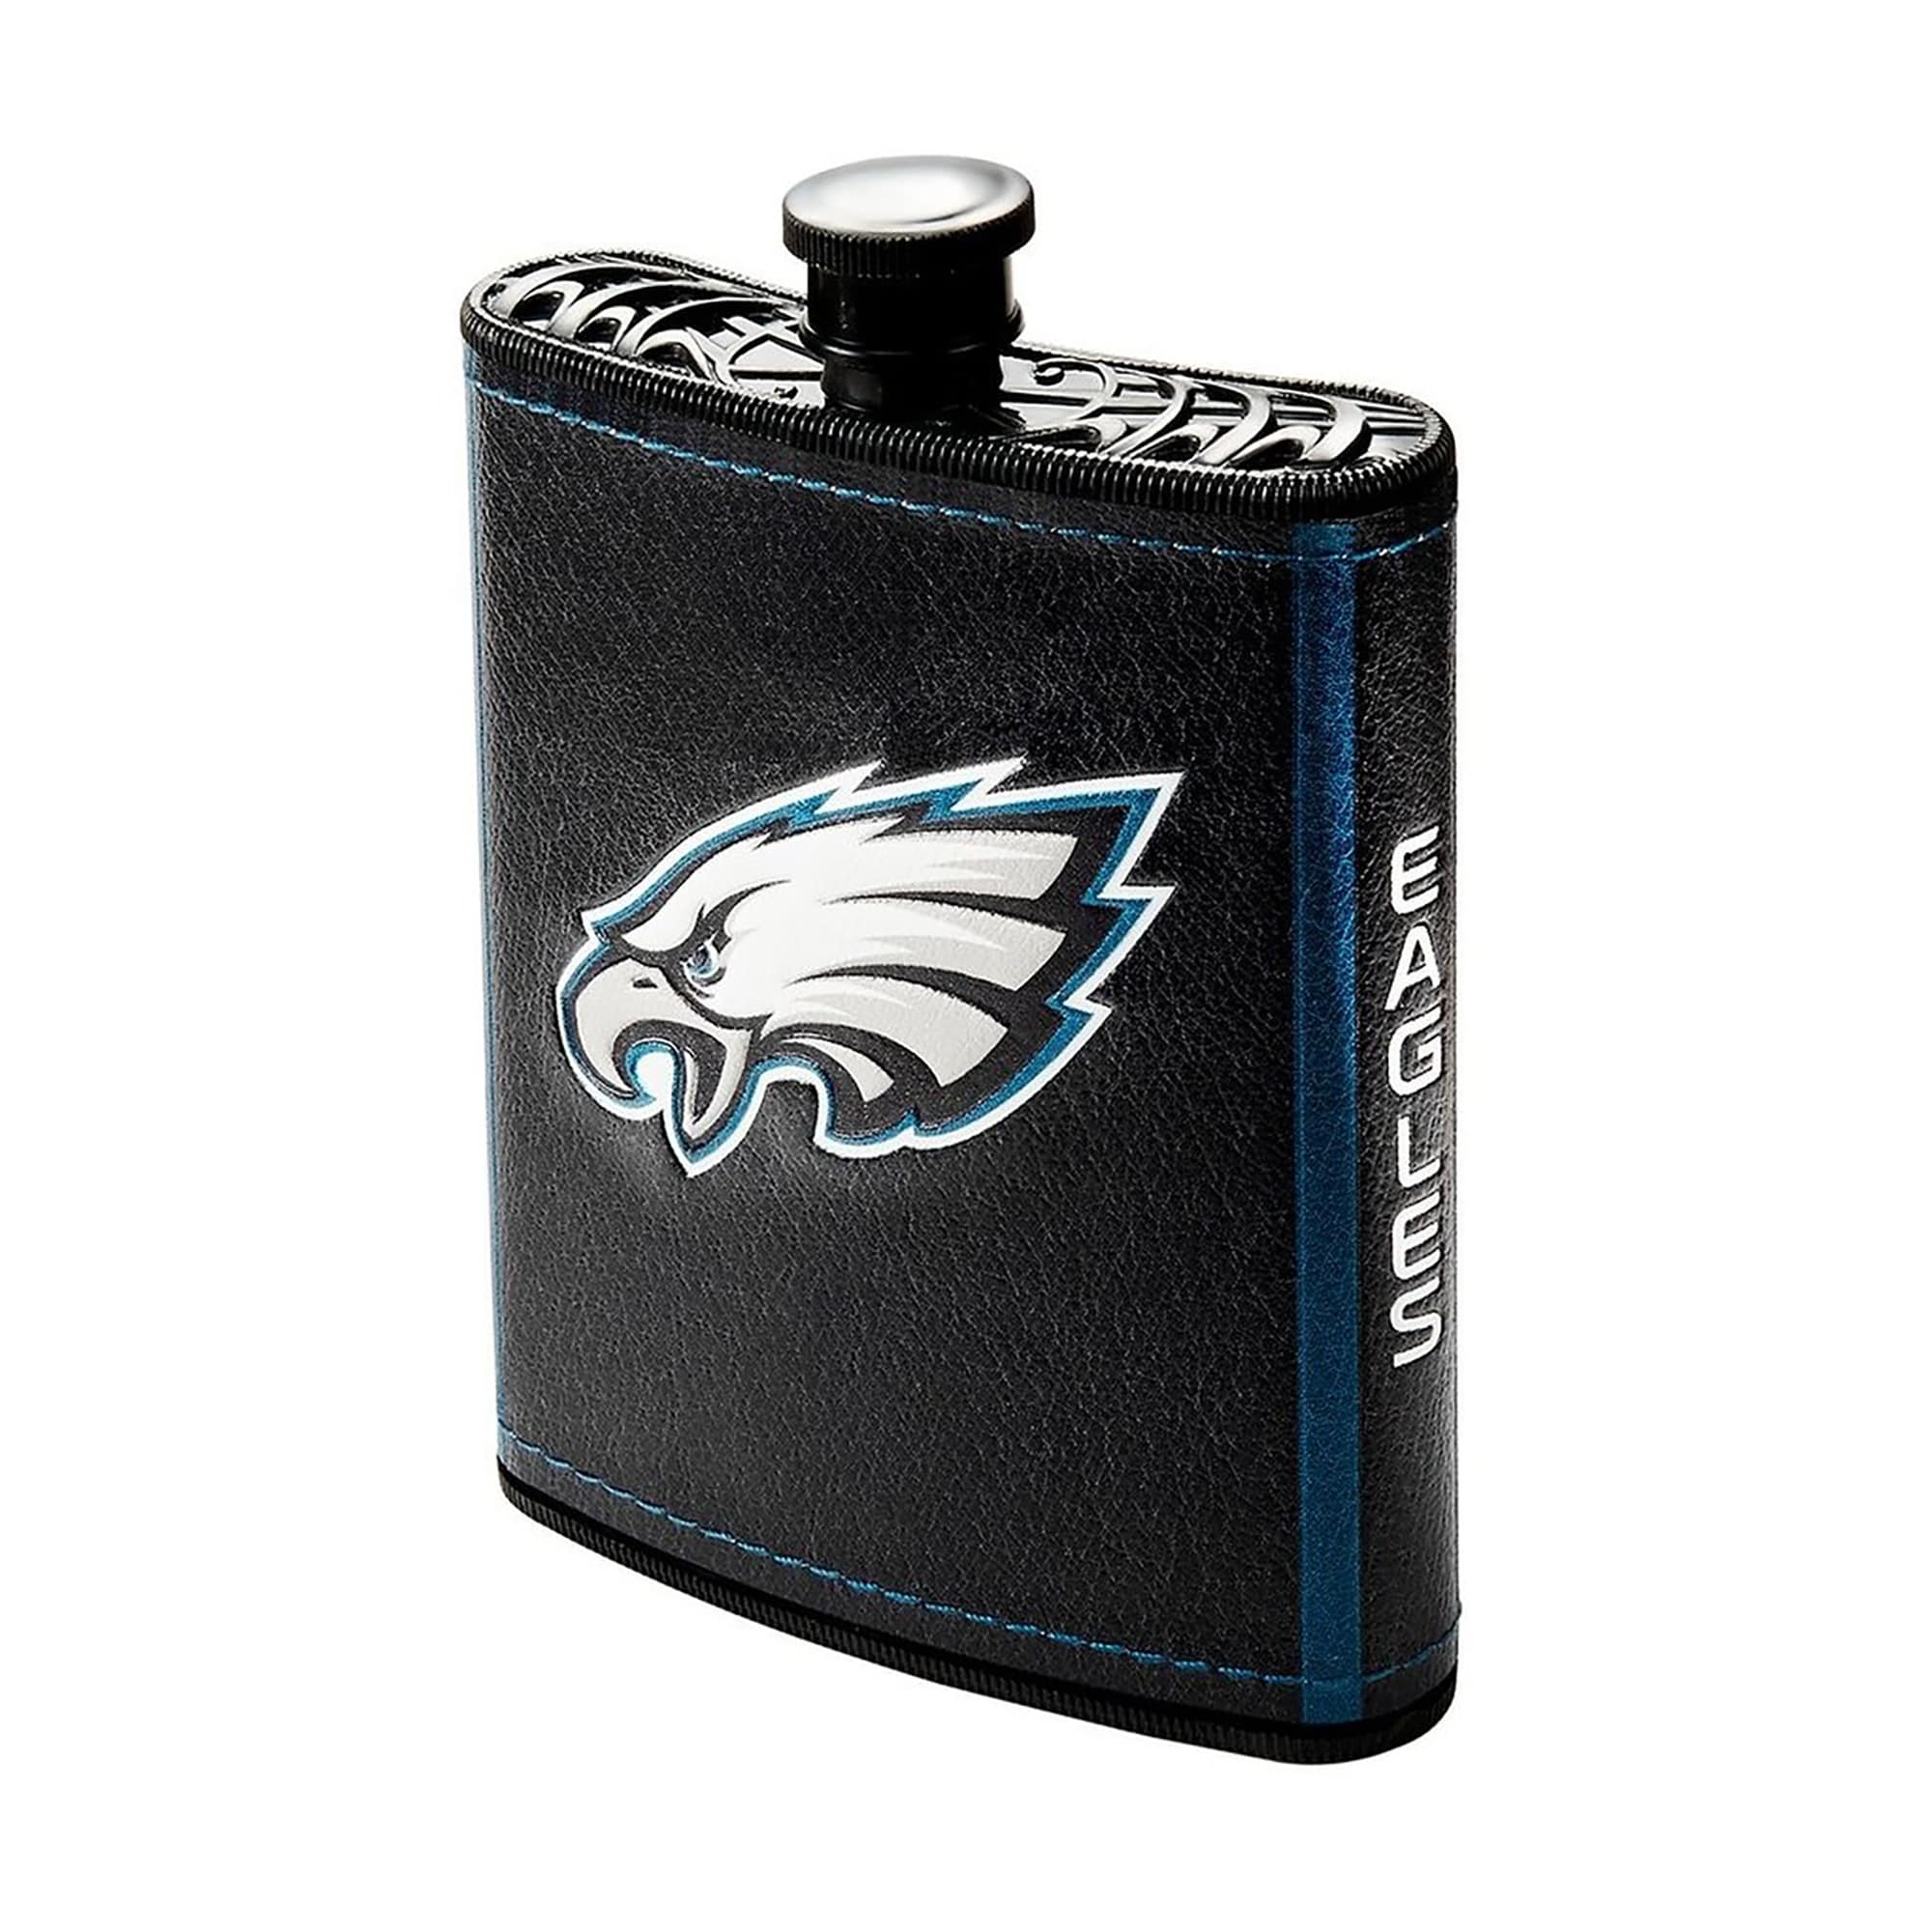 https://ak1.ostkcdn.com/images/products/is/images/direct/0cb7fdff3c3ce9ff7c263bc22f5c8dbf777174df/NFL-2pc-Flask-with-Funnel%2C-7oz%2C-Philadelphia-Eagles.jpg